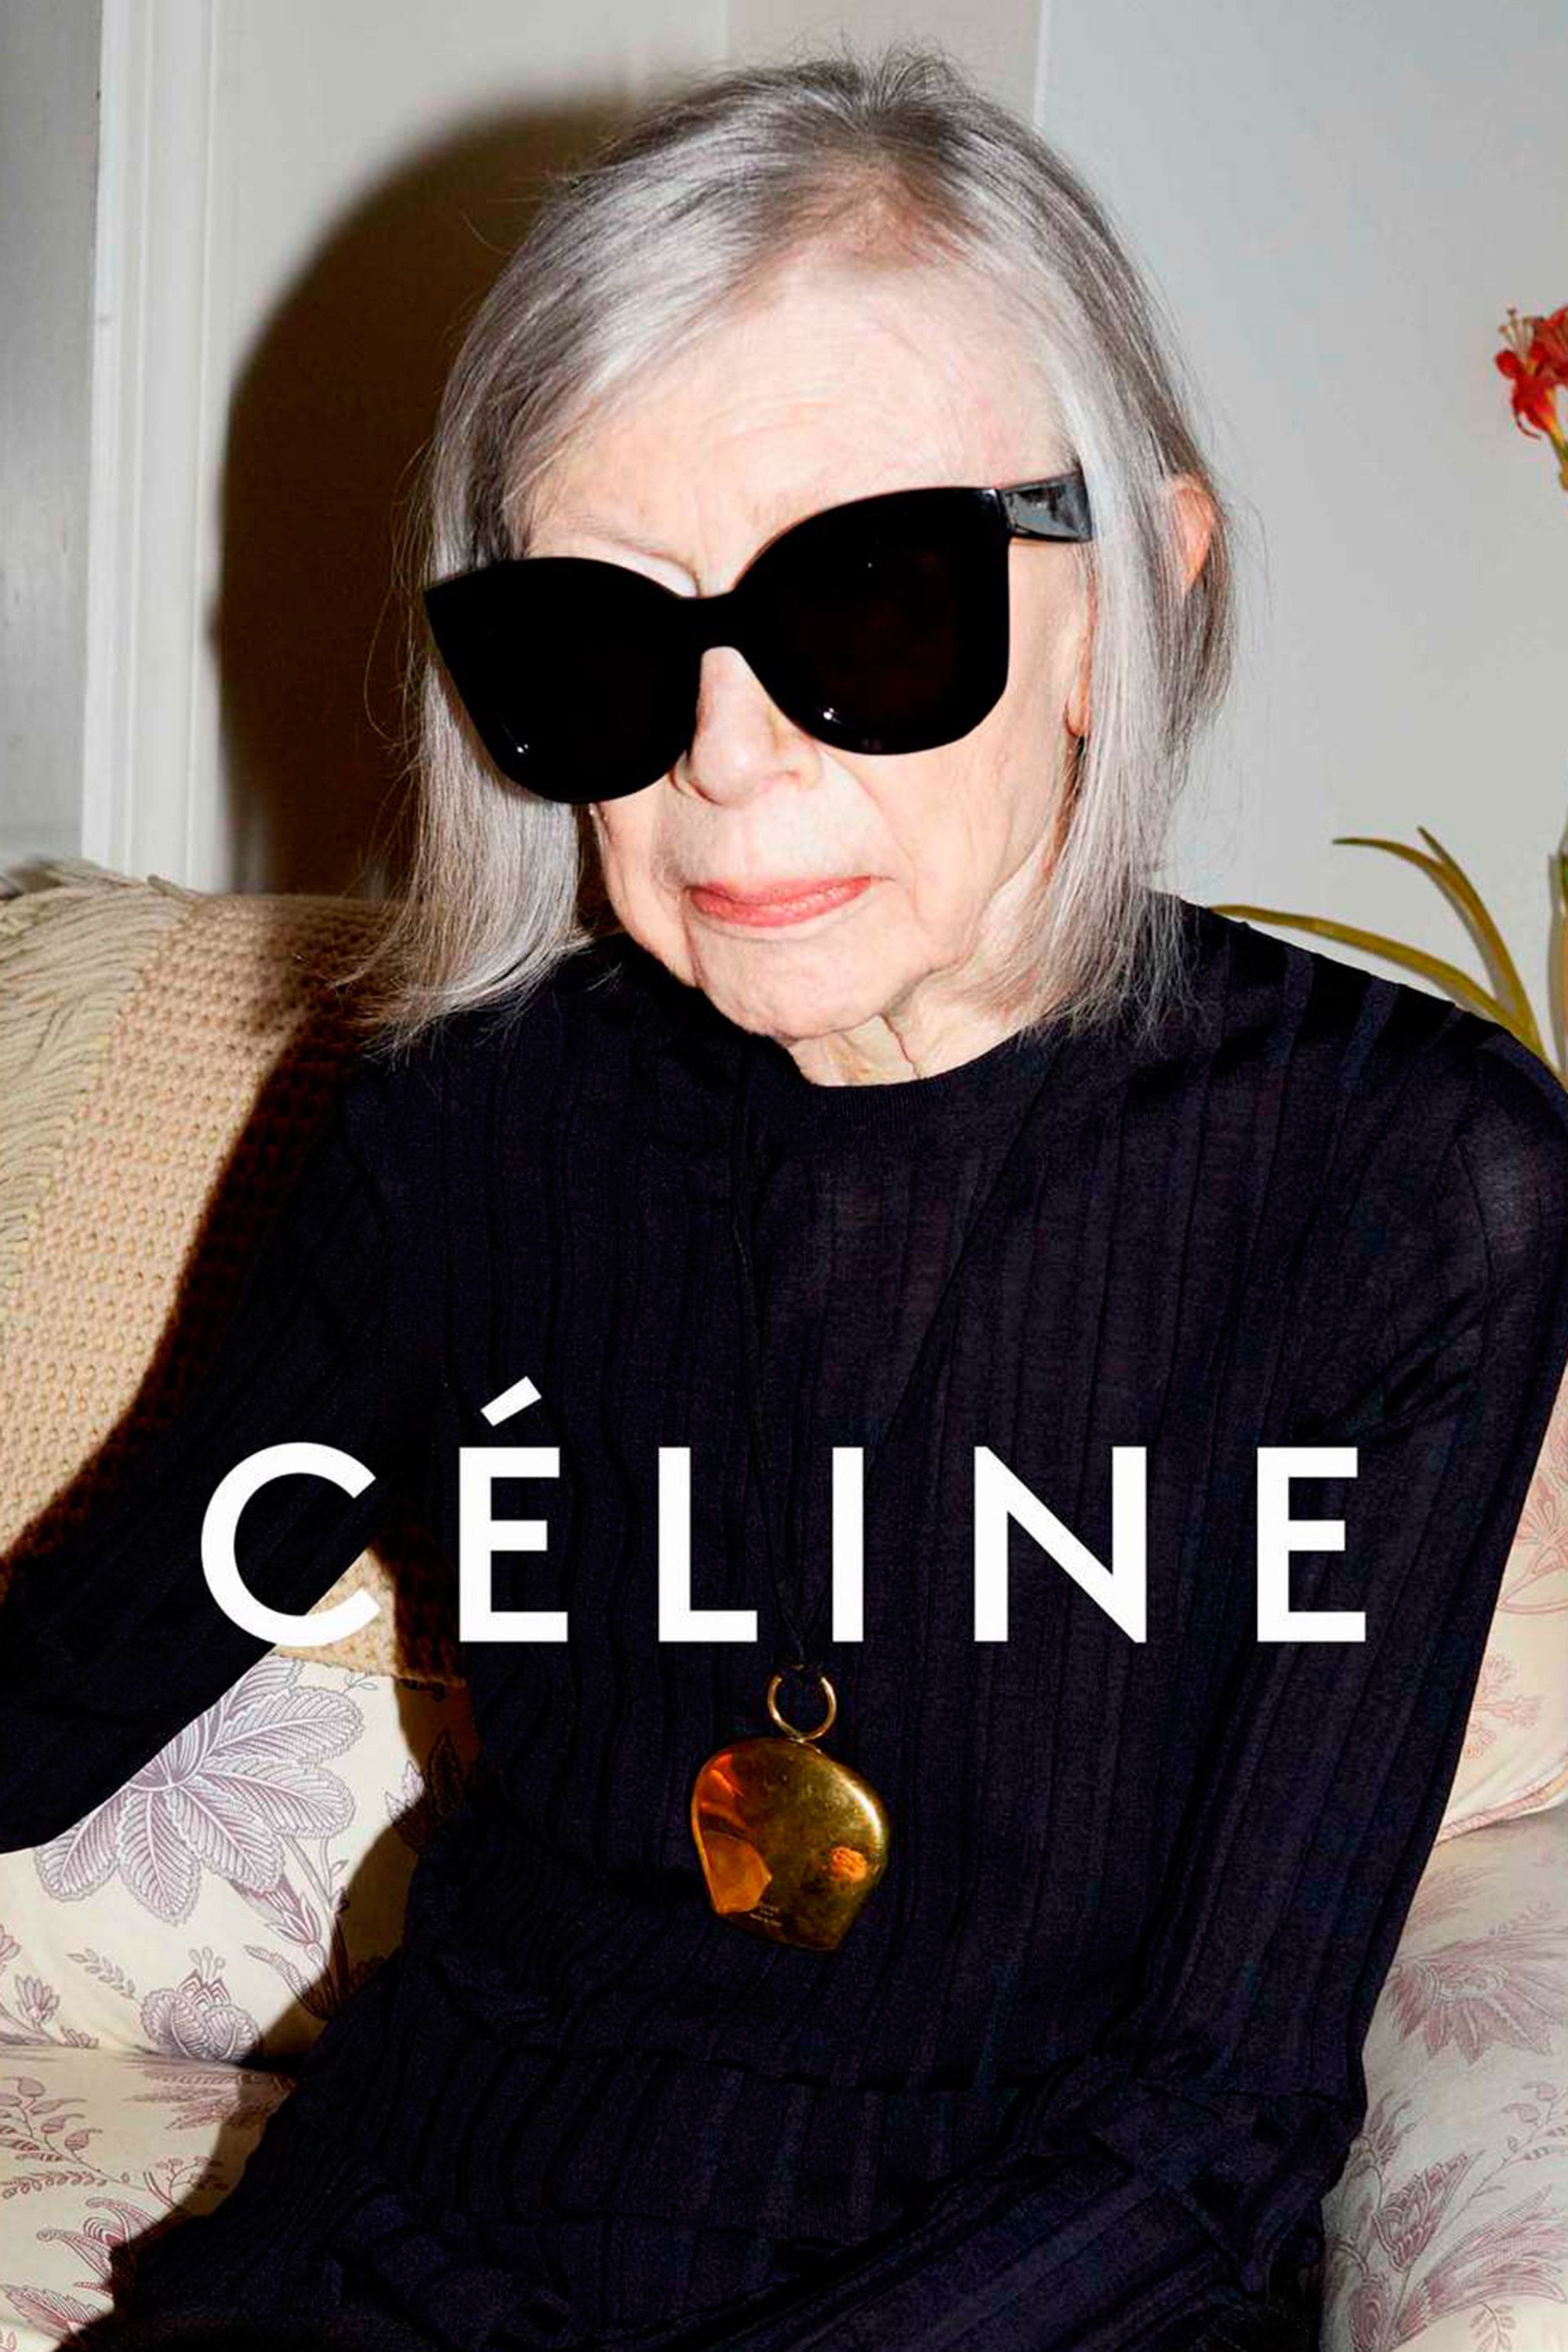 How Phoebe Philo's Celine Changed Fashion: Most Iconic Celine looks and  what we can expect next 